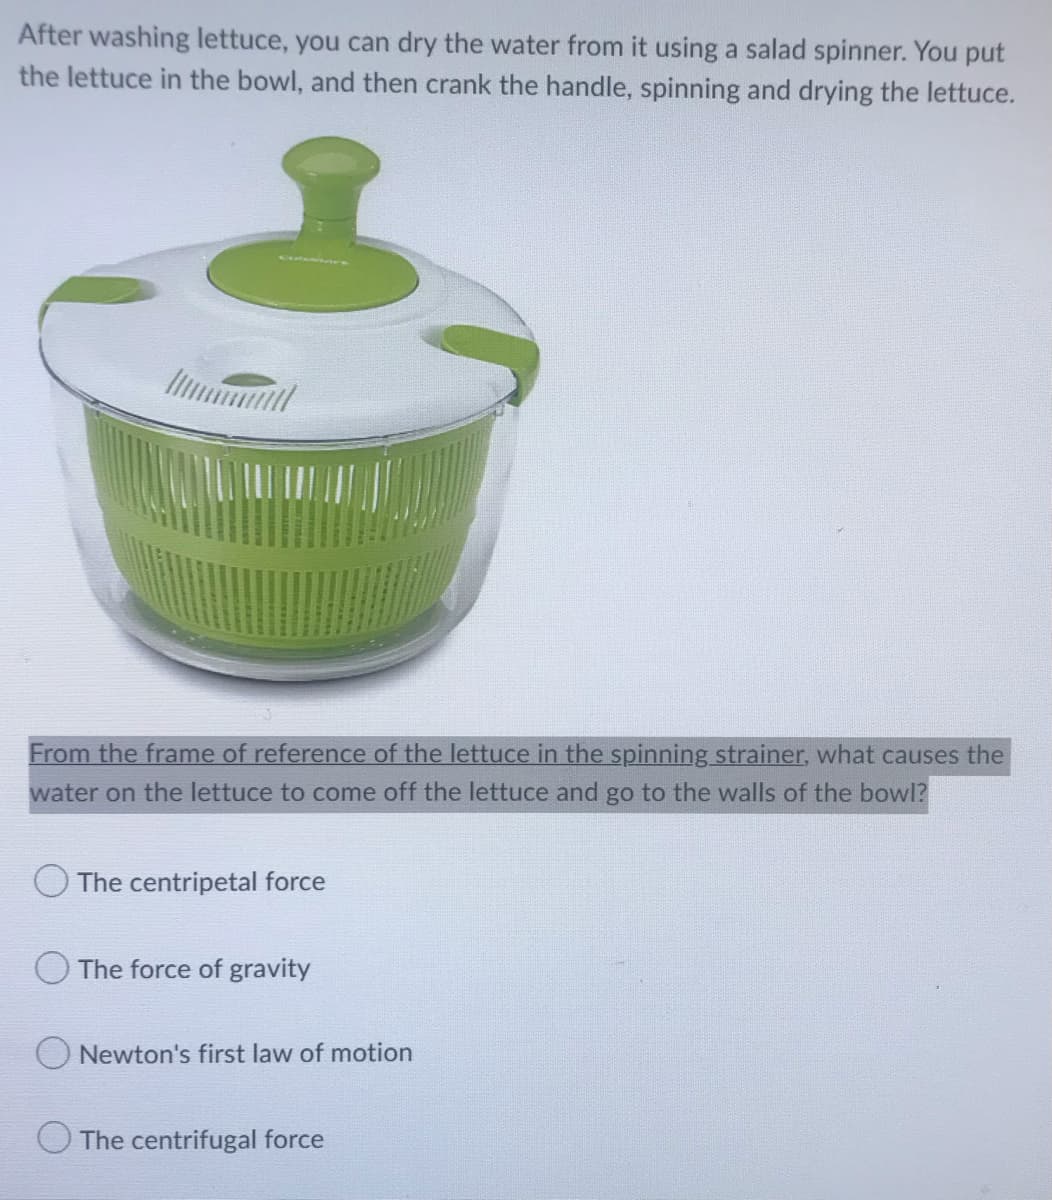 After washing lettuce, you can dry the water from it using a salad spinner. You put
the lettuce in the bowl, and then crank the handle, spinning and drying the lettuce.
From the frame of reference of the lettuce in the spinning strainer, what causes the
water on the lettuce to come off the lettuce and go to the walls of the bowl?
The centripetal force
The force of gravity
Newton's first law of motion
The centrifugal force